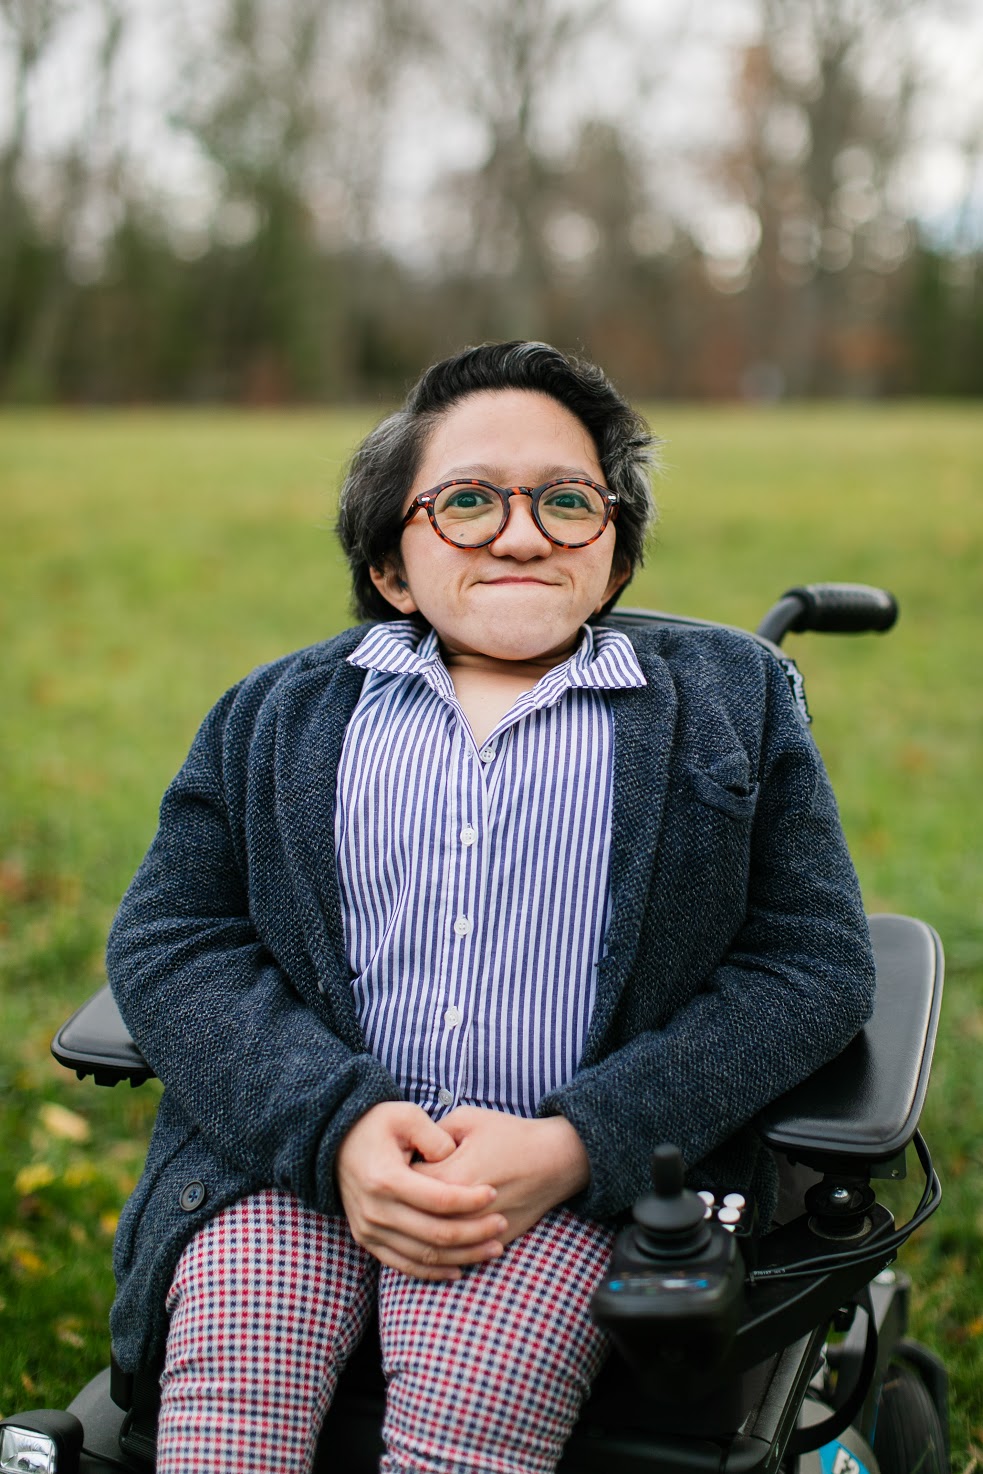 Sandy Ho, an Asian American woman in a power wheelchair, sits in a field of grass looking confidently into the camera. She is wearing round glasses, a gray sweater over a blue striped collar shirt, and red checkered pants.